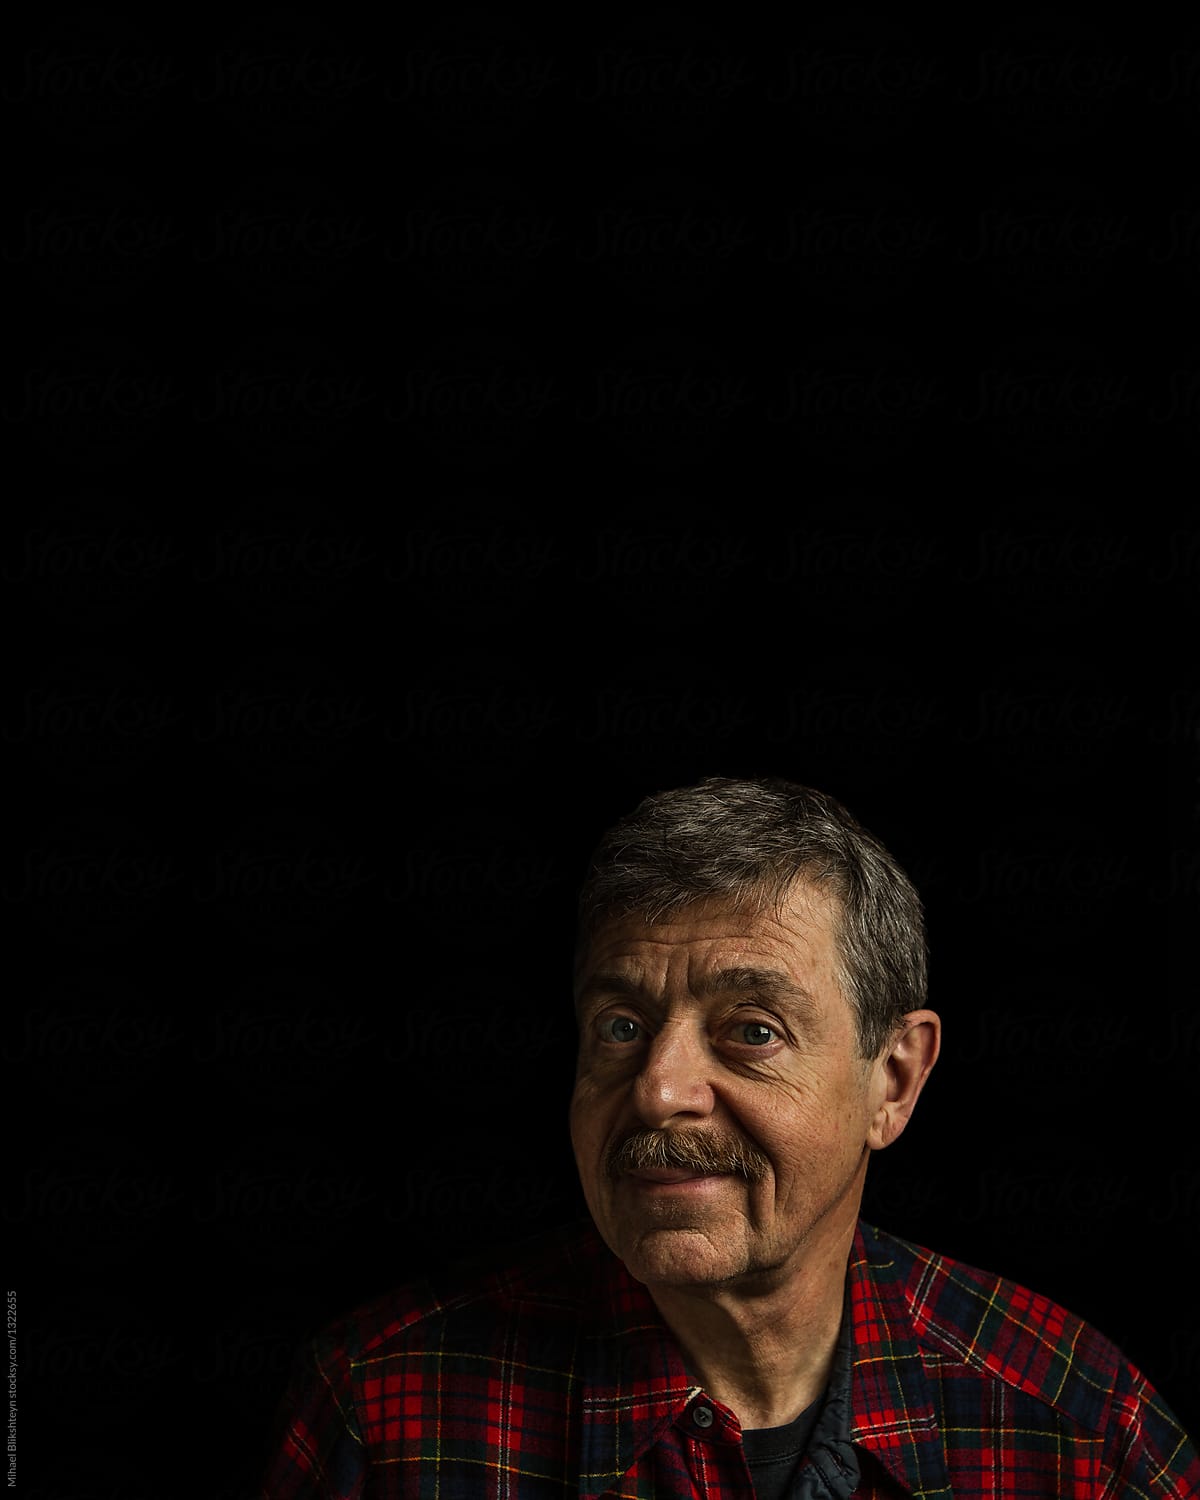 Portrait of a man in plaid button-up shirt isolated on a